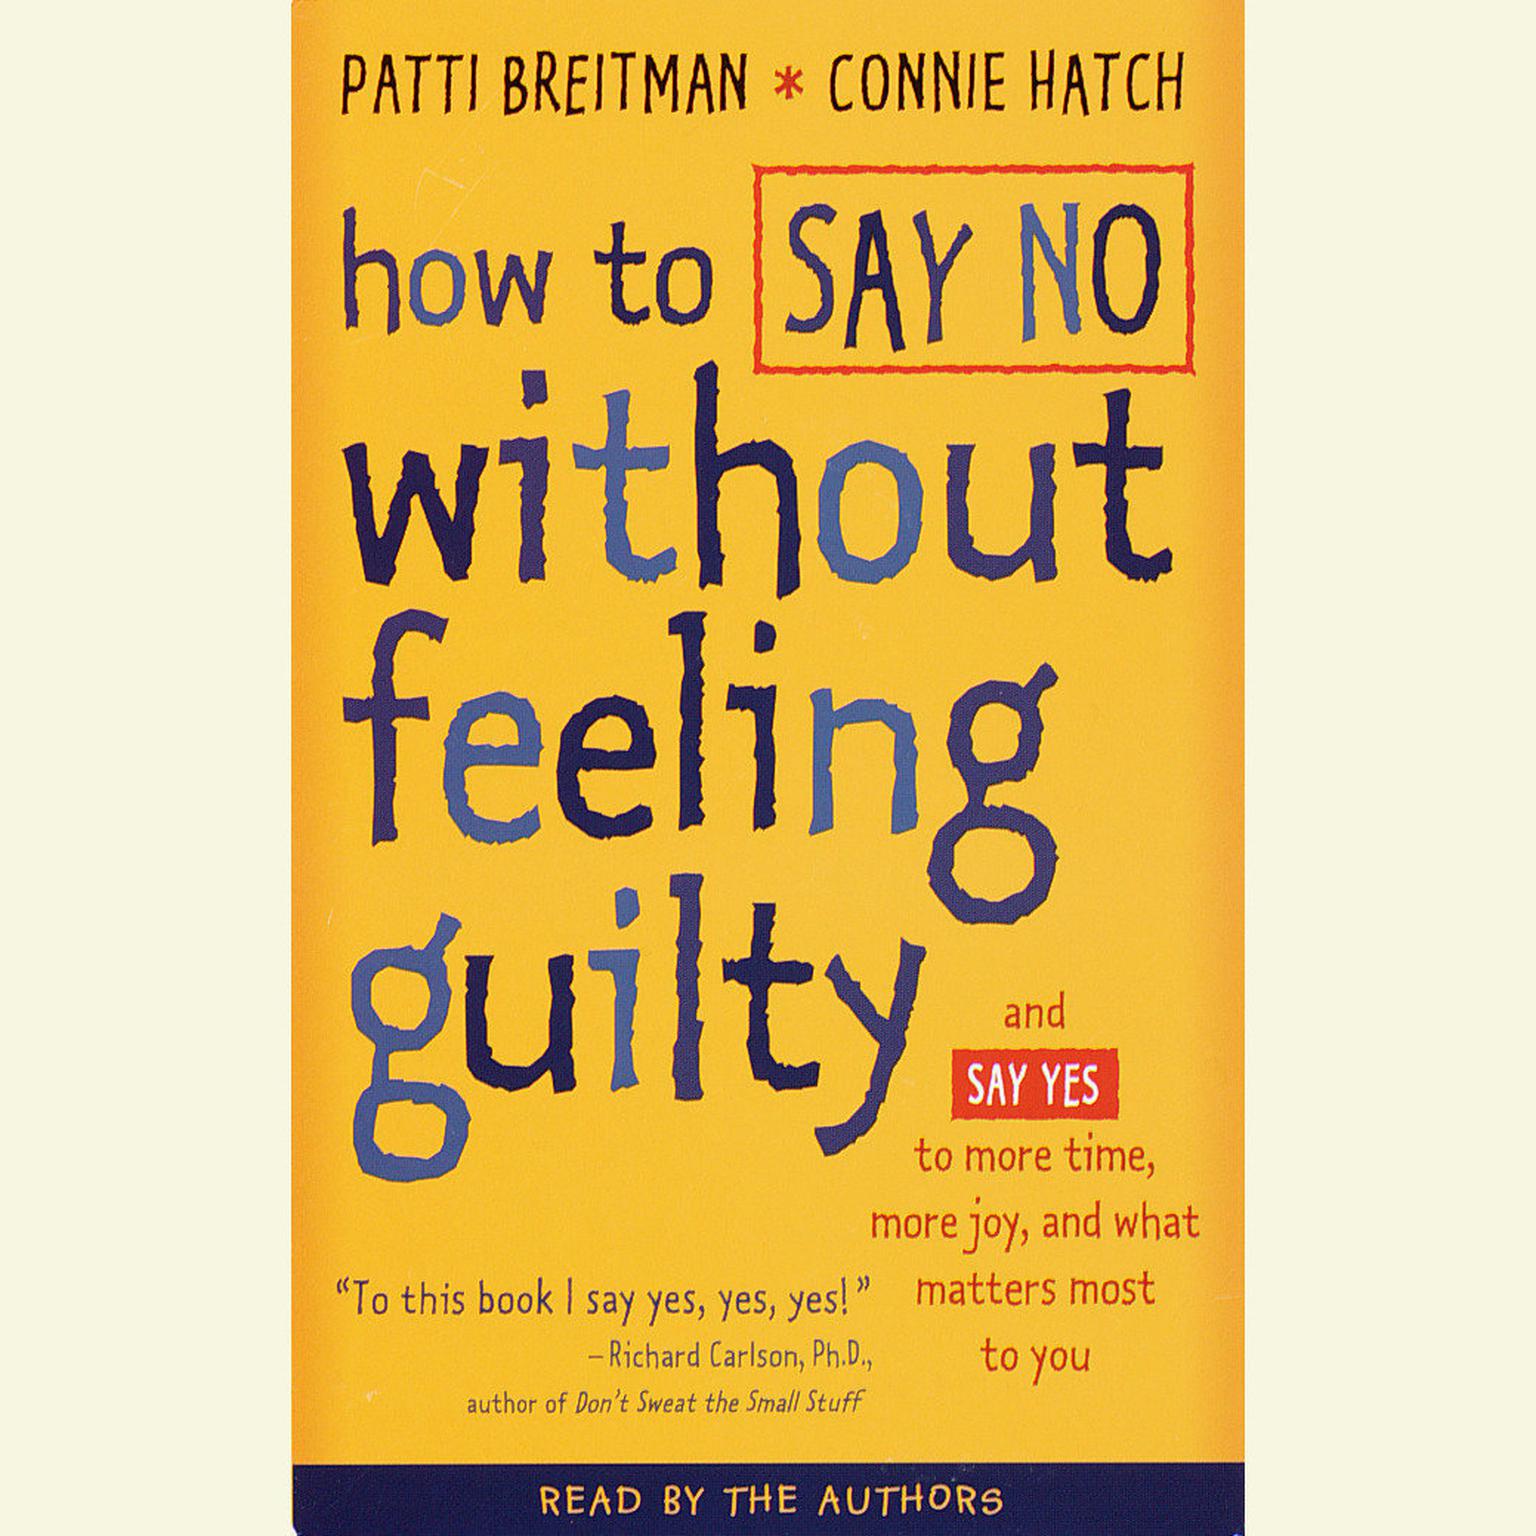 How to Say No Without Feeling Guilty (Abridged): And Say Yes to More Time, and What Matters Most to You Audiobook, by Patti Breitman